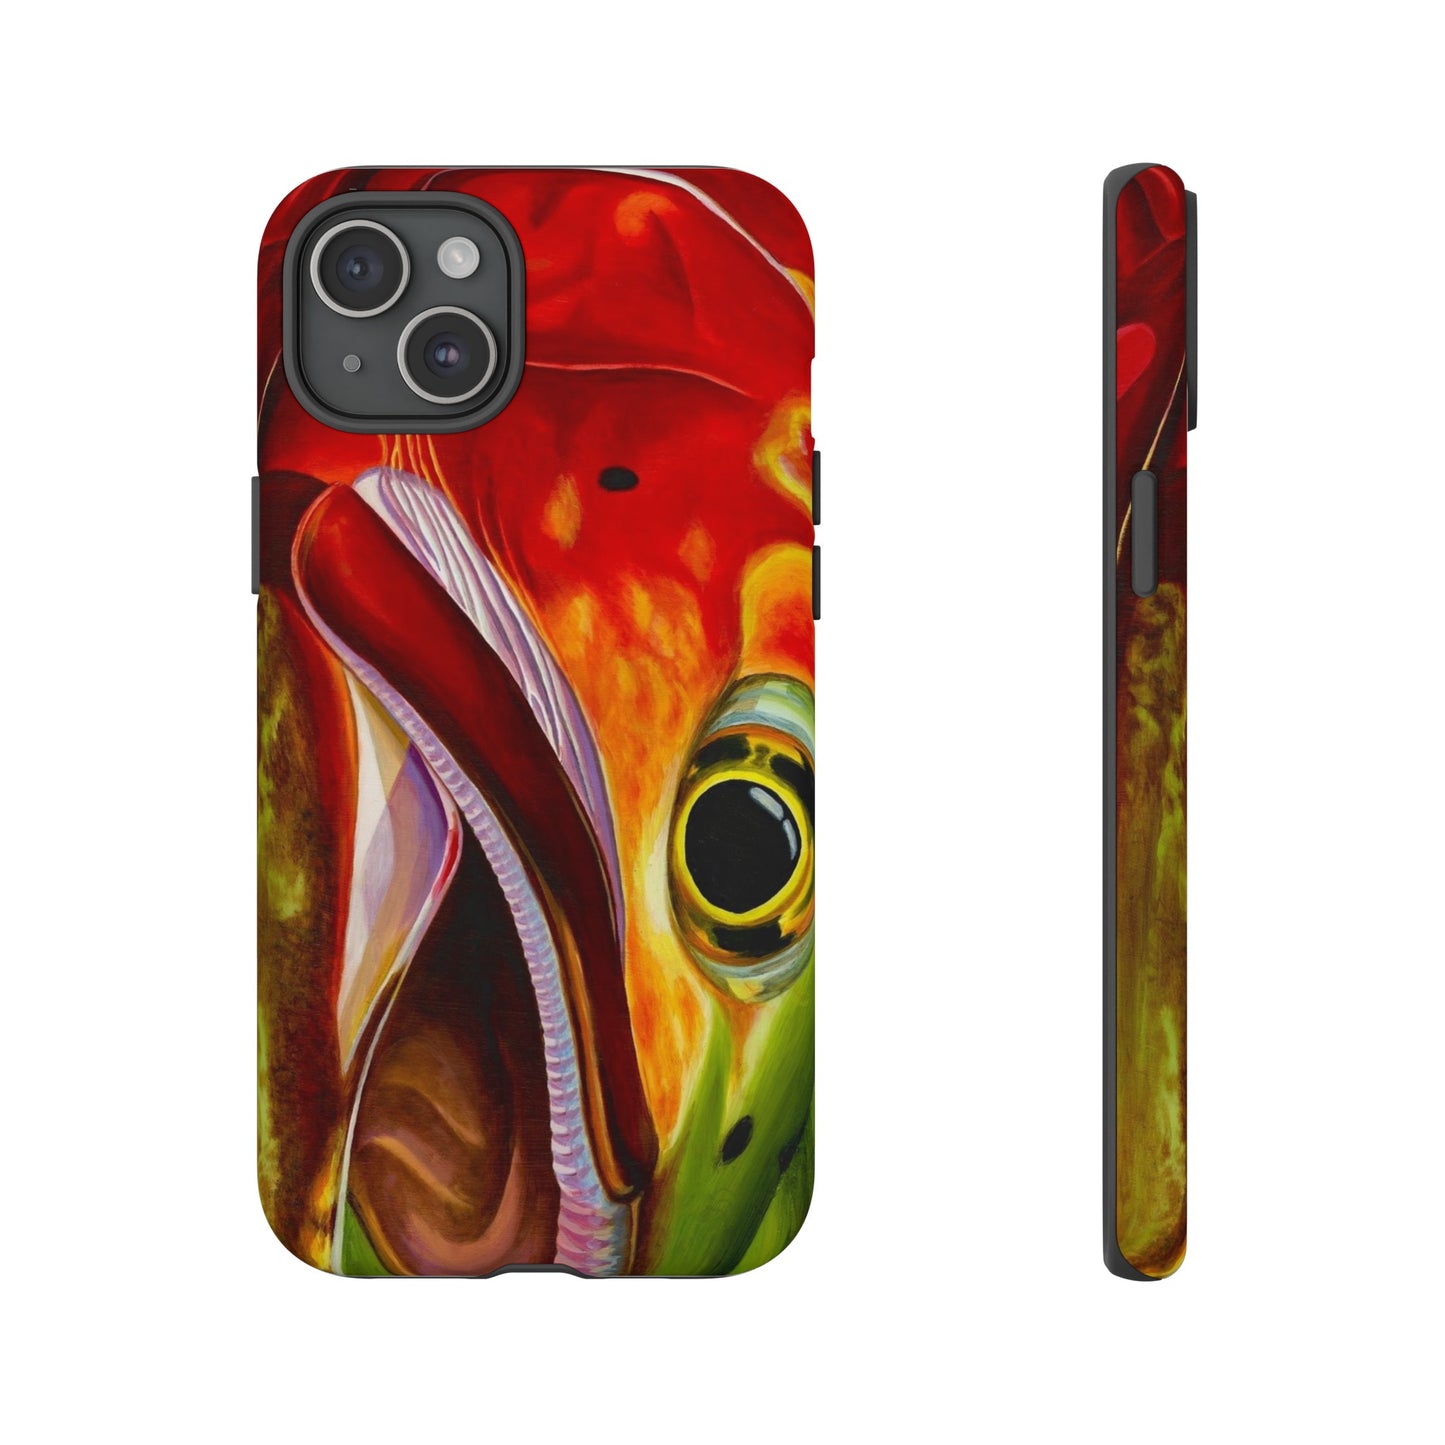 Fishing Phone Case, Trout IPhone Case, Samsung Galaxy Case, Google Pixel Case, Fishing Phone Case,  Gift for Fisherman